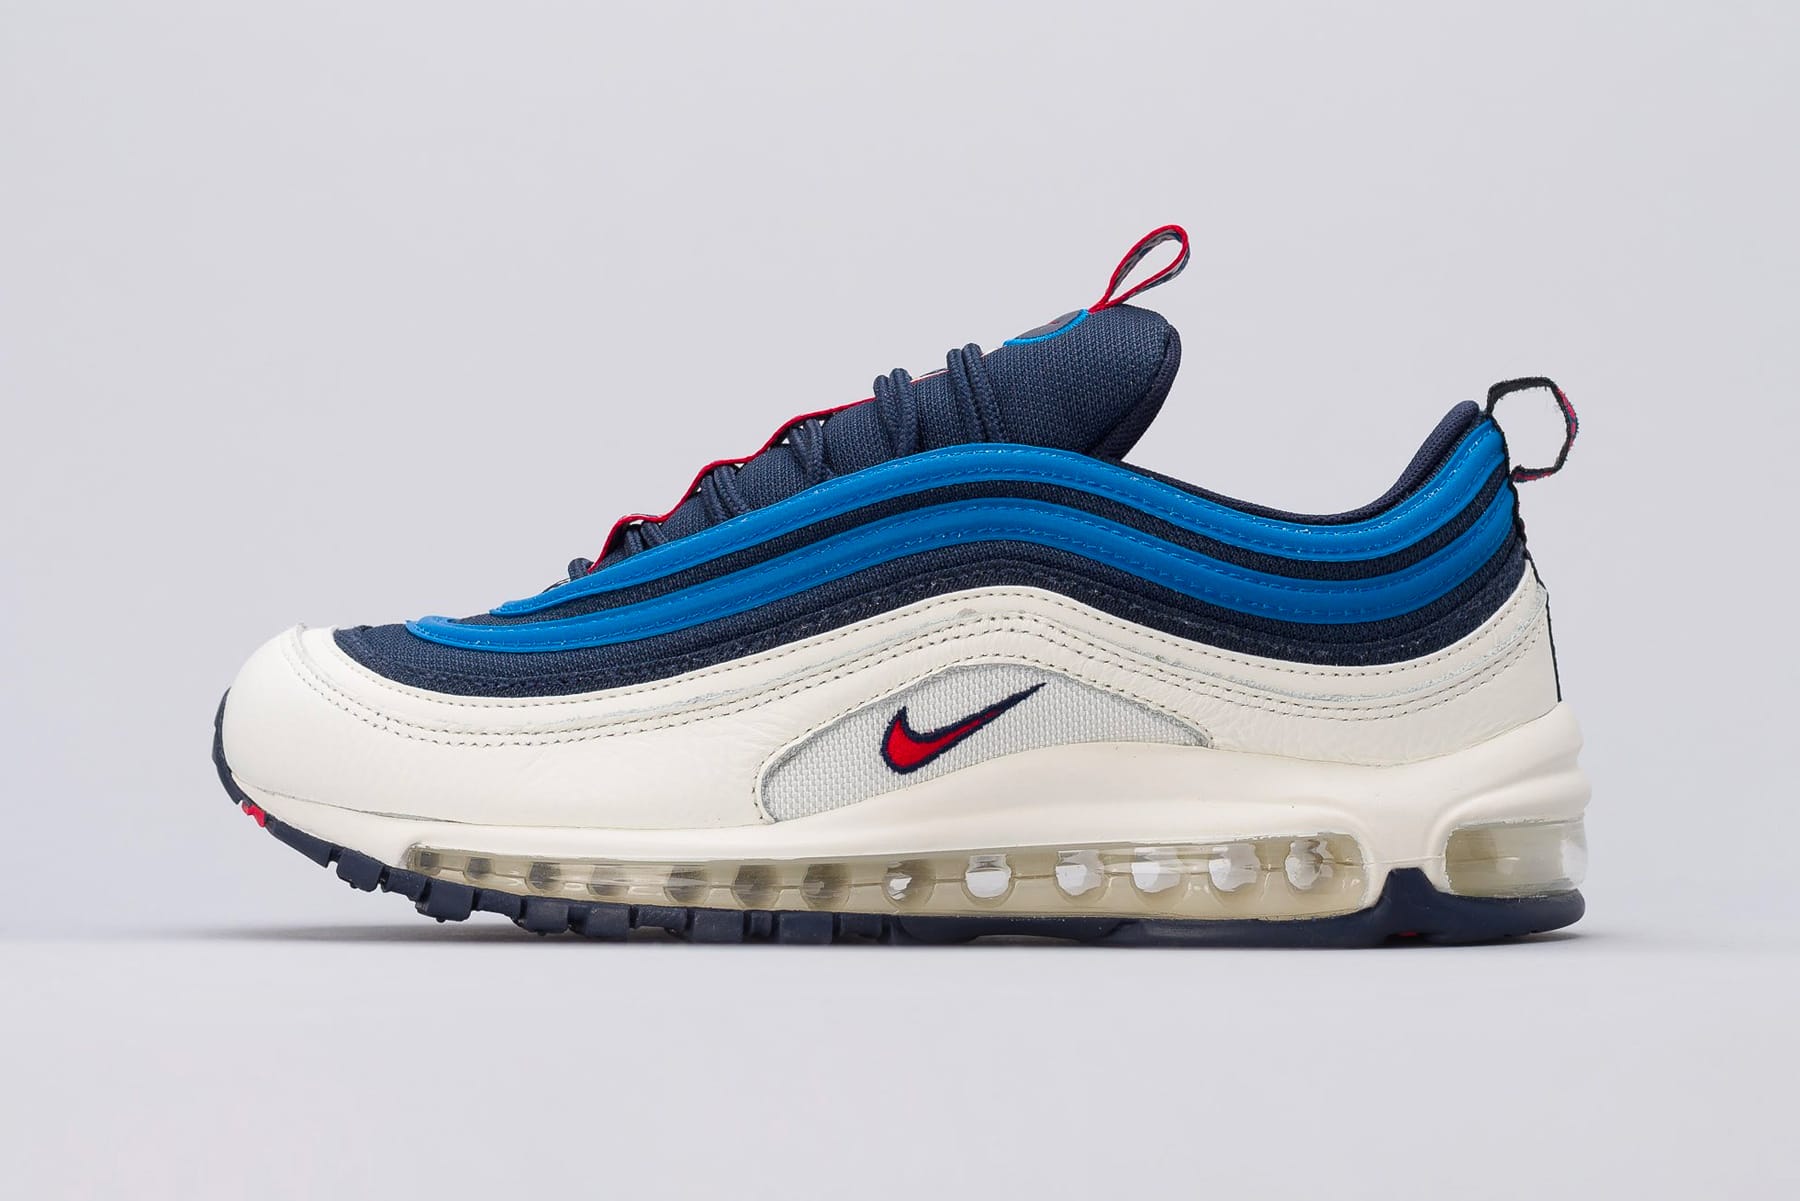 Nike Air Max 97 “Pull Tab” Another Look 